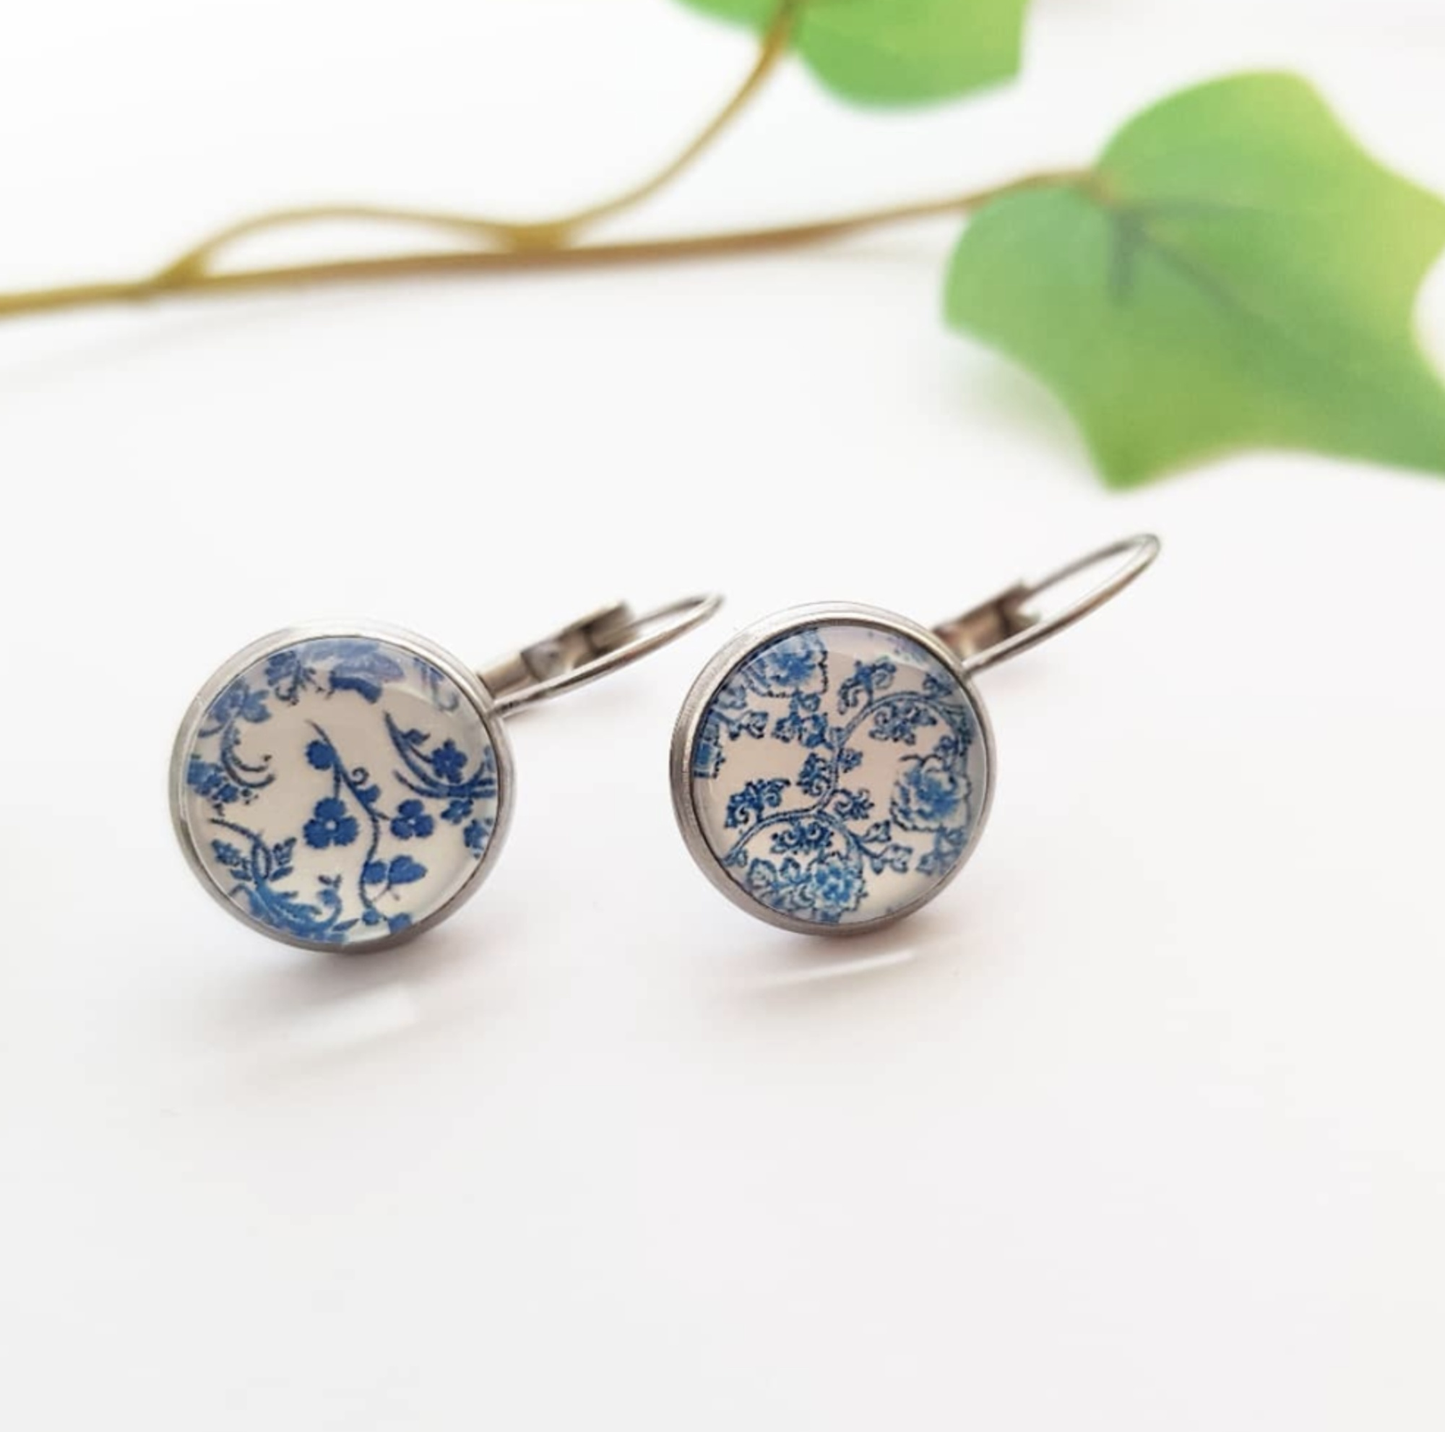 Blue Floral Cabochon earrings - Romantic and Shabby jewelry for woman - C o c o F l o w e r